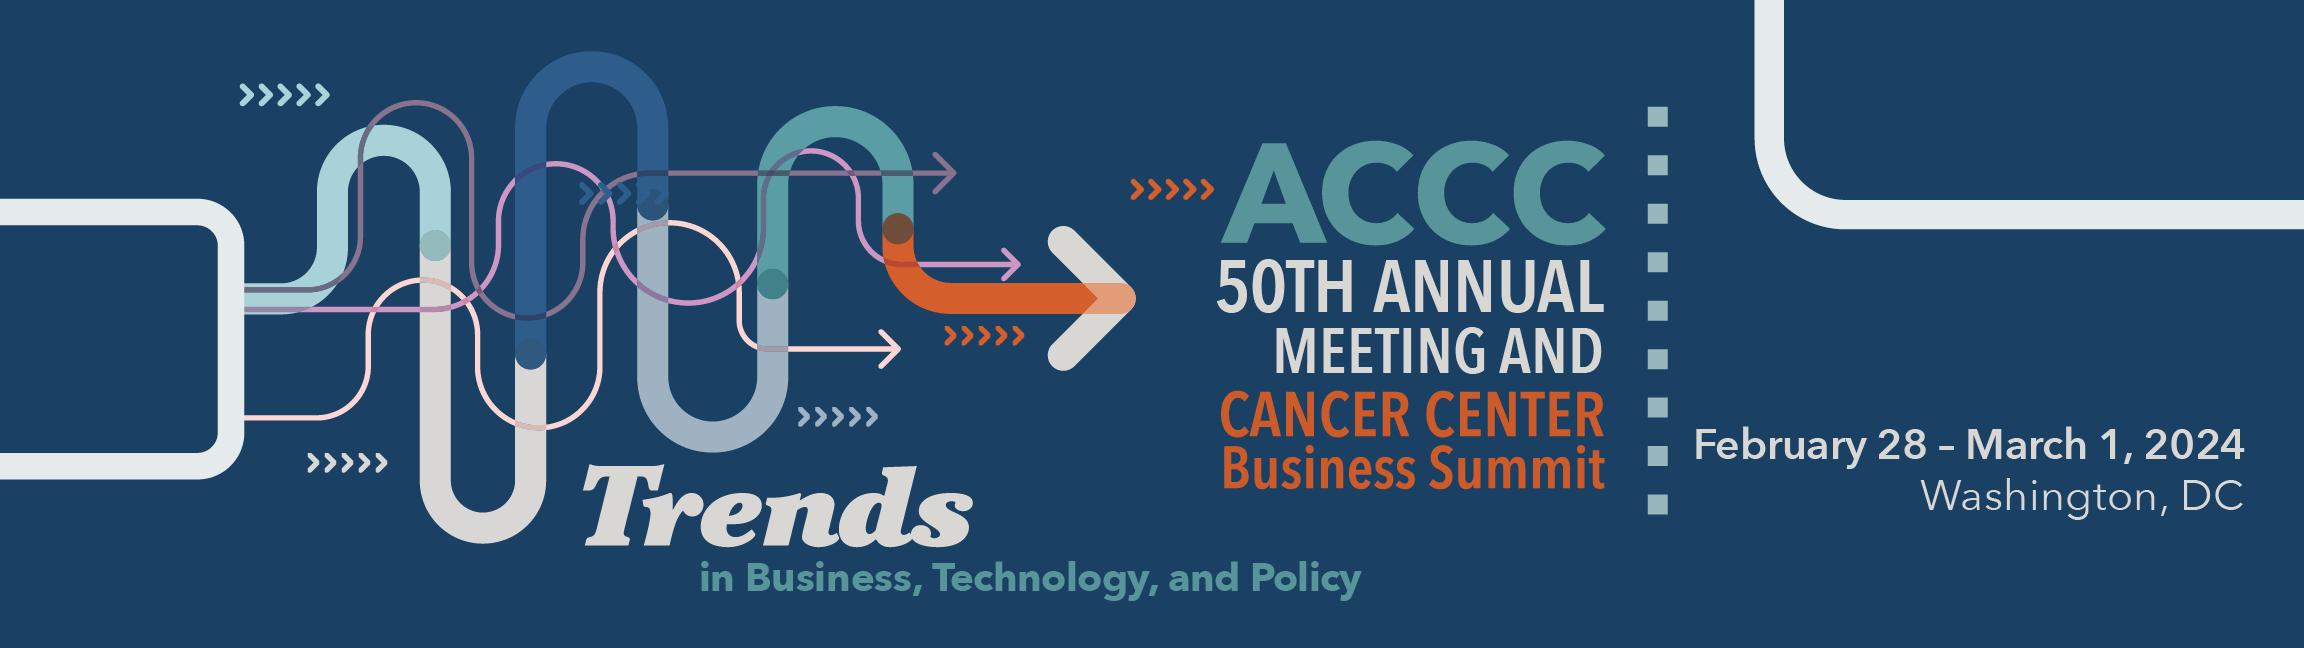 ACCC 50th Annual Meeting & Cancer Center Business Summit, February 28 - March 1, 2024, Washington DC